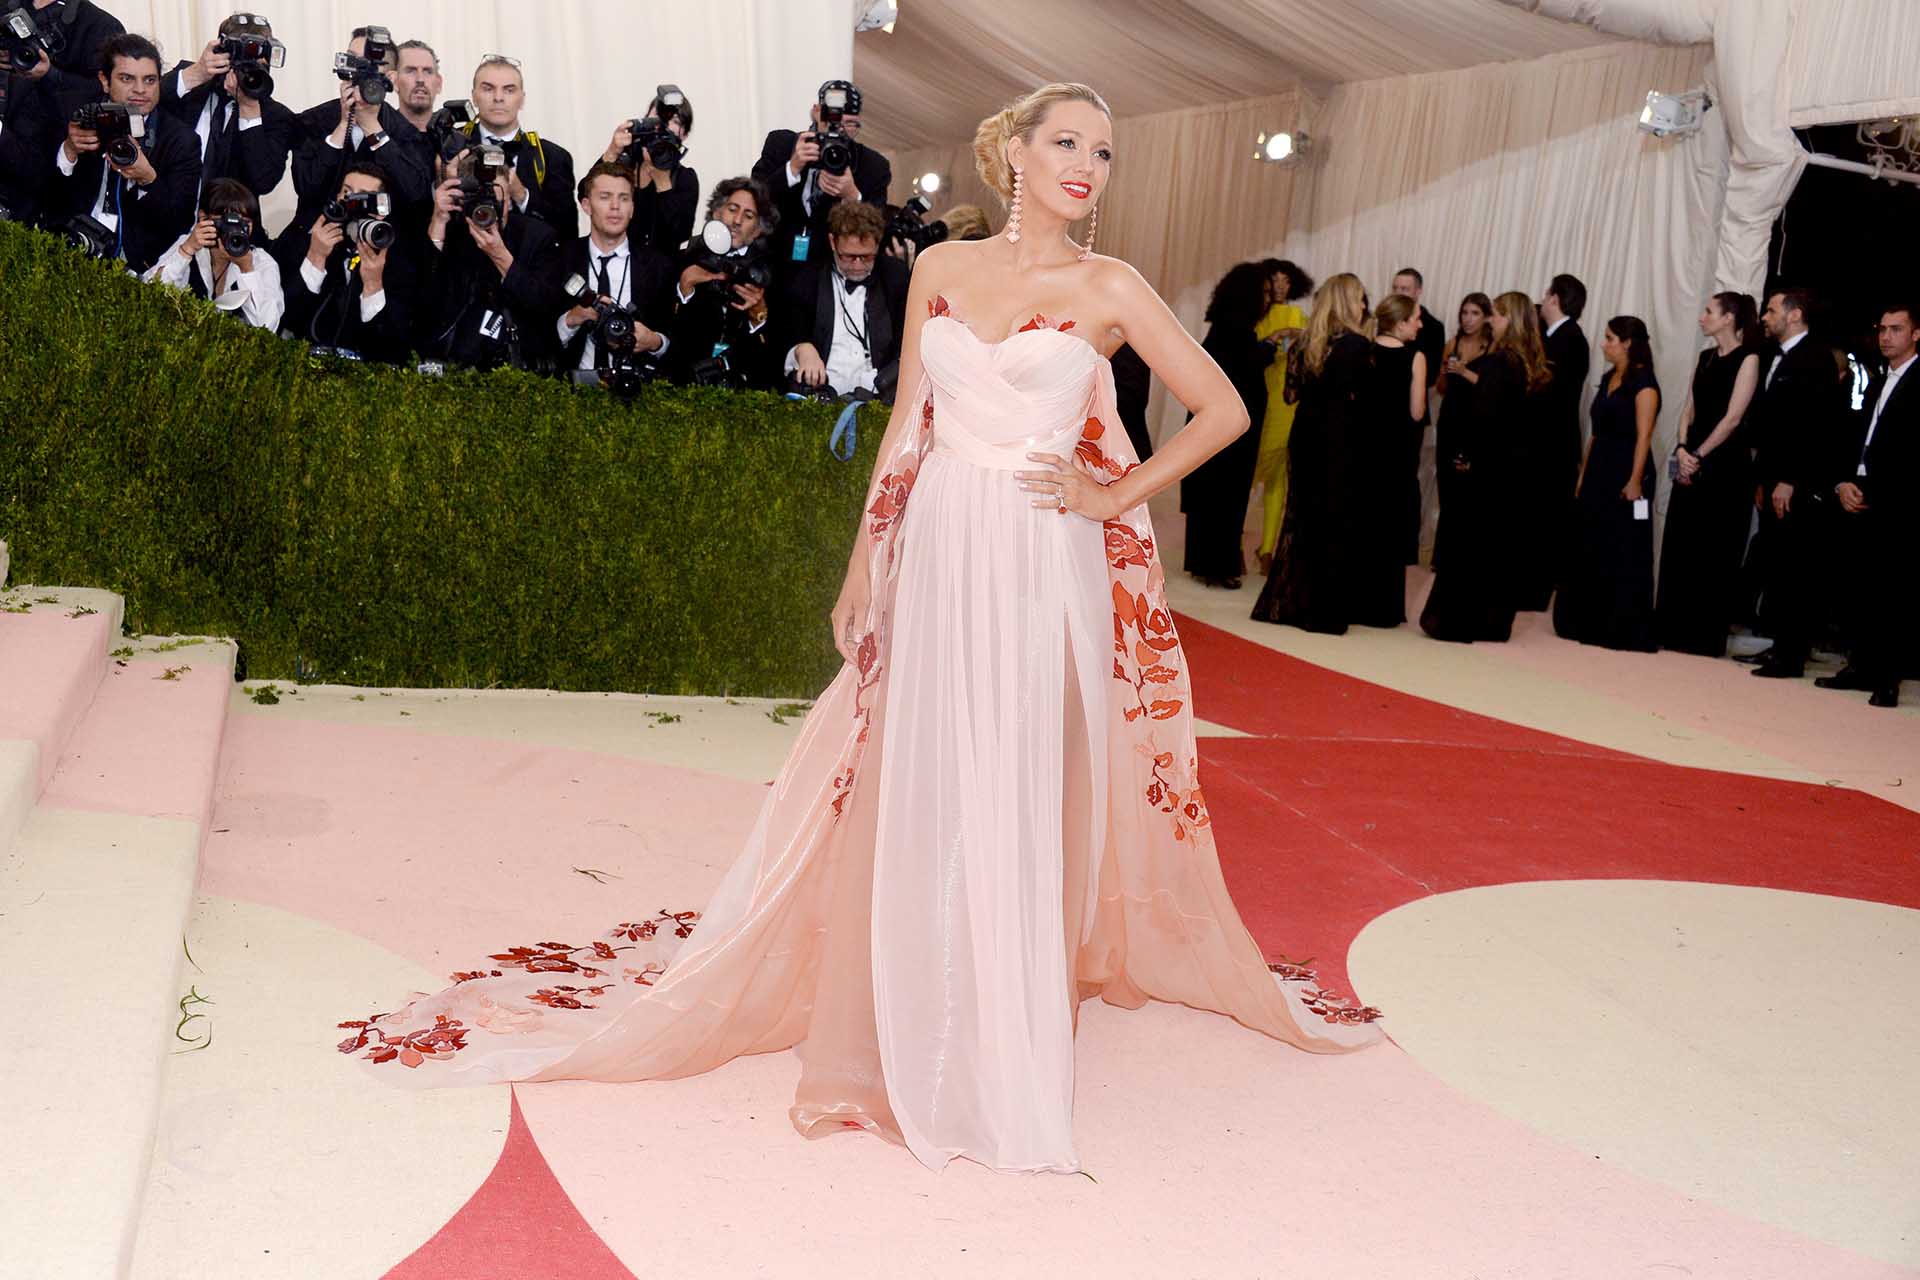 Actress Blake Lively at The Metropolitan Museum of Art Costume Institute Gala, celebrating the opening of "Manus x Machina: Fashion in an Age of Technology" on Monday, May 2, 2016, in New York.